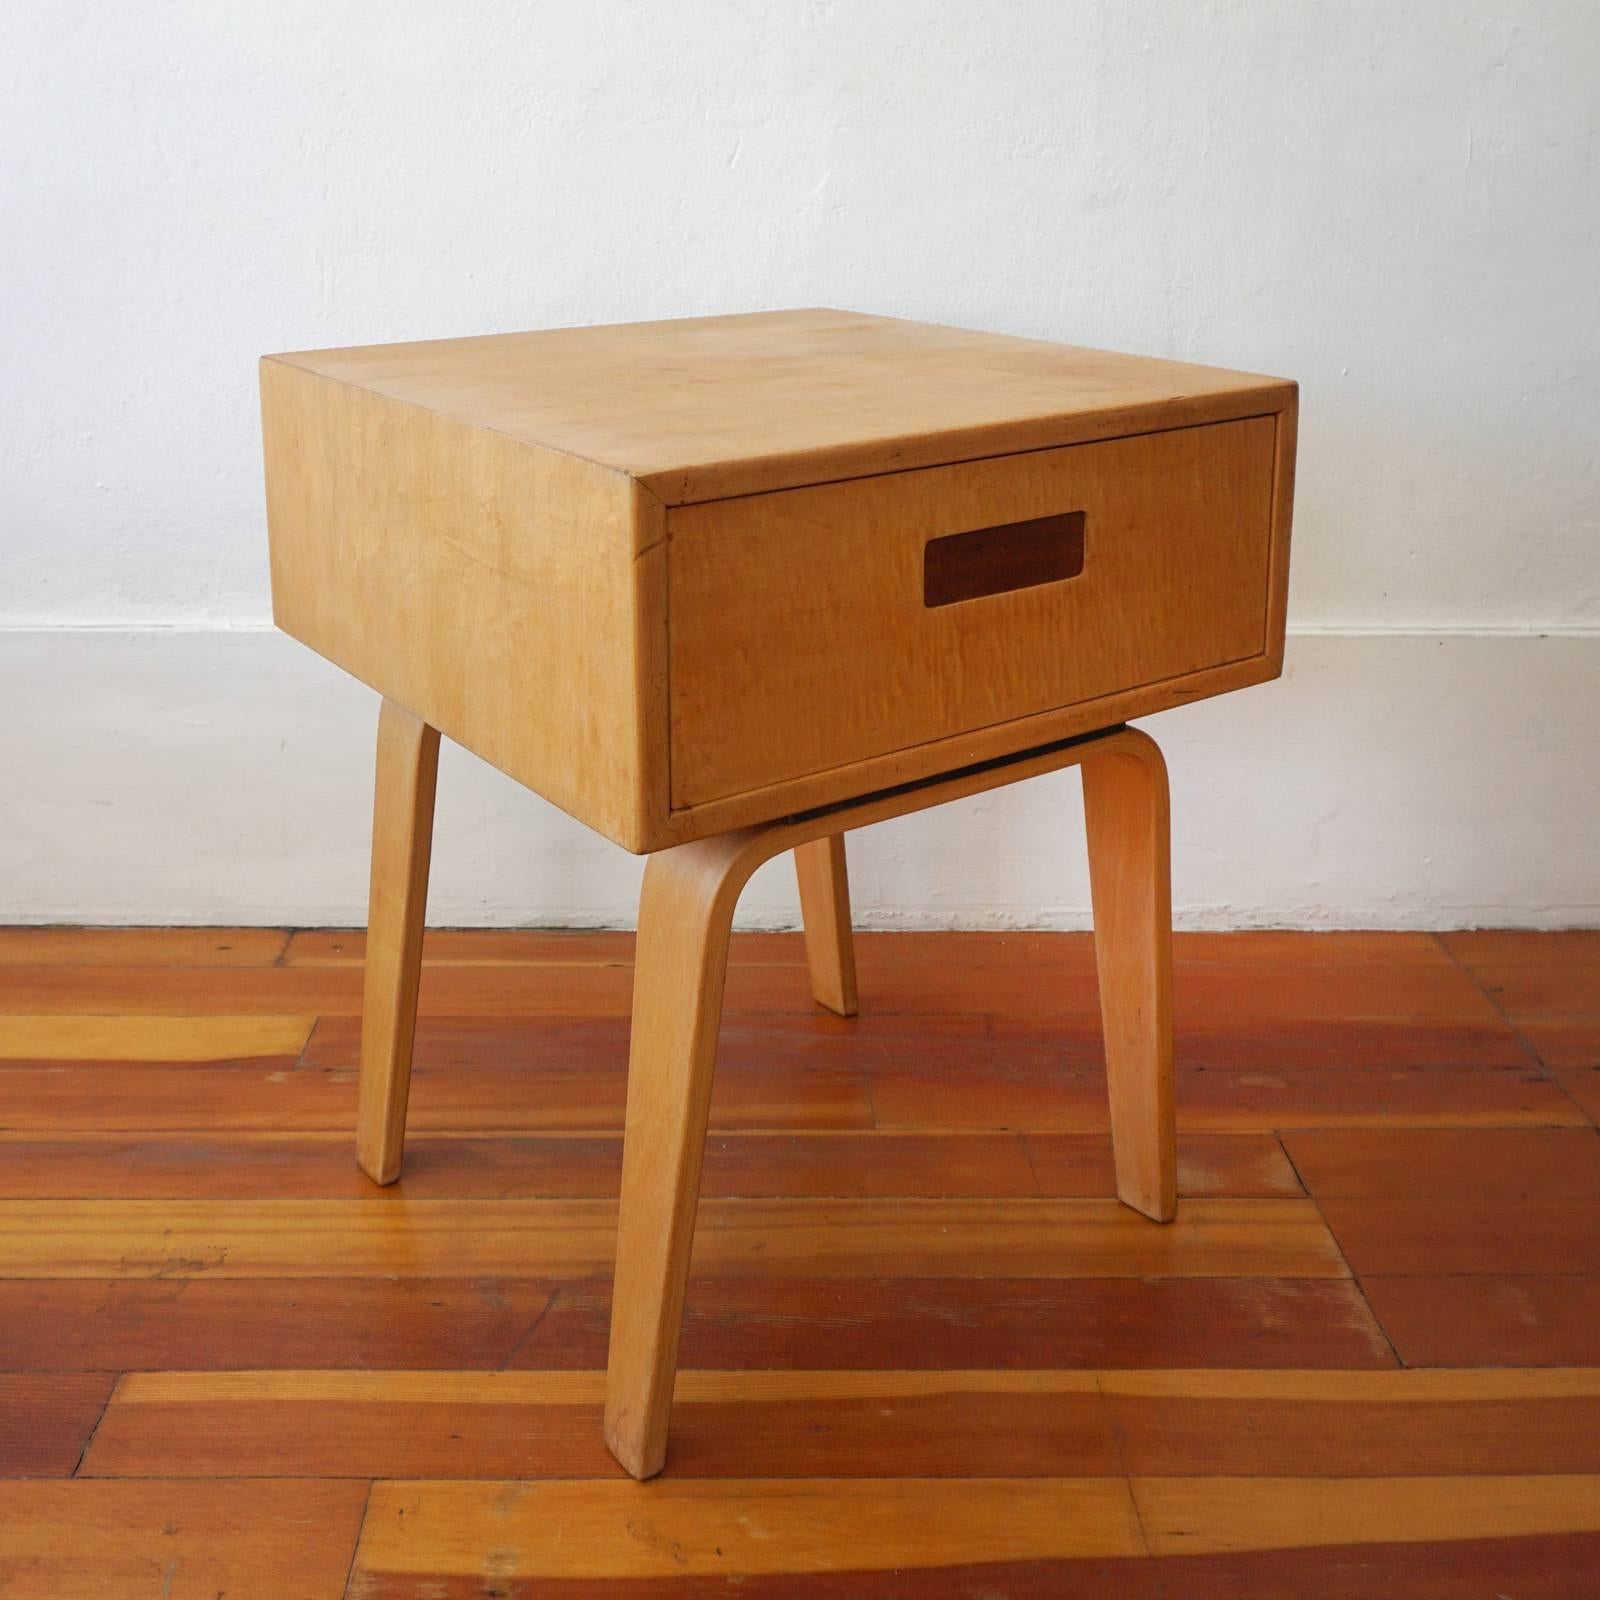 1950s birch end table or nightstand by Clifford Pascoe for his company, Pascoe. The single drawer unit has a spring loaded recessed pull. 

Pascoe had a showroom in New York City and a manufacturing facility in Wisconsin. They produced their own